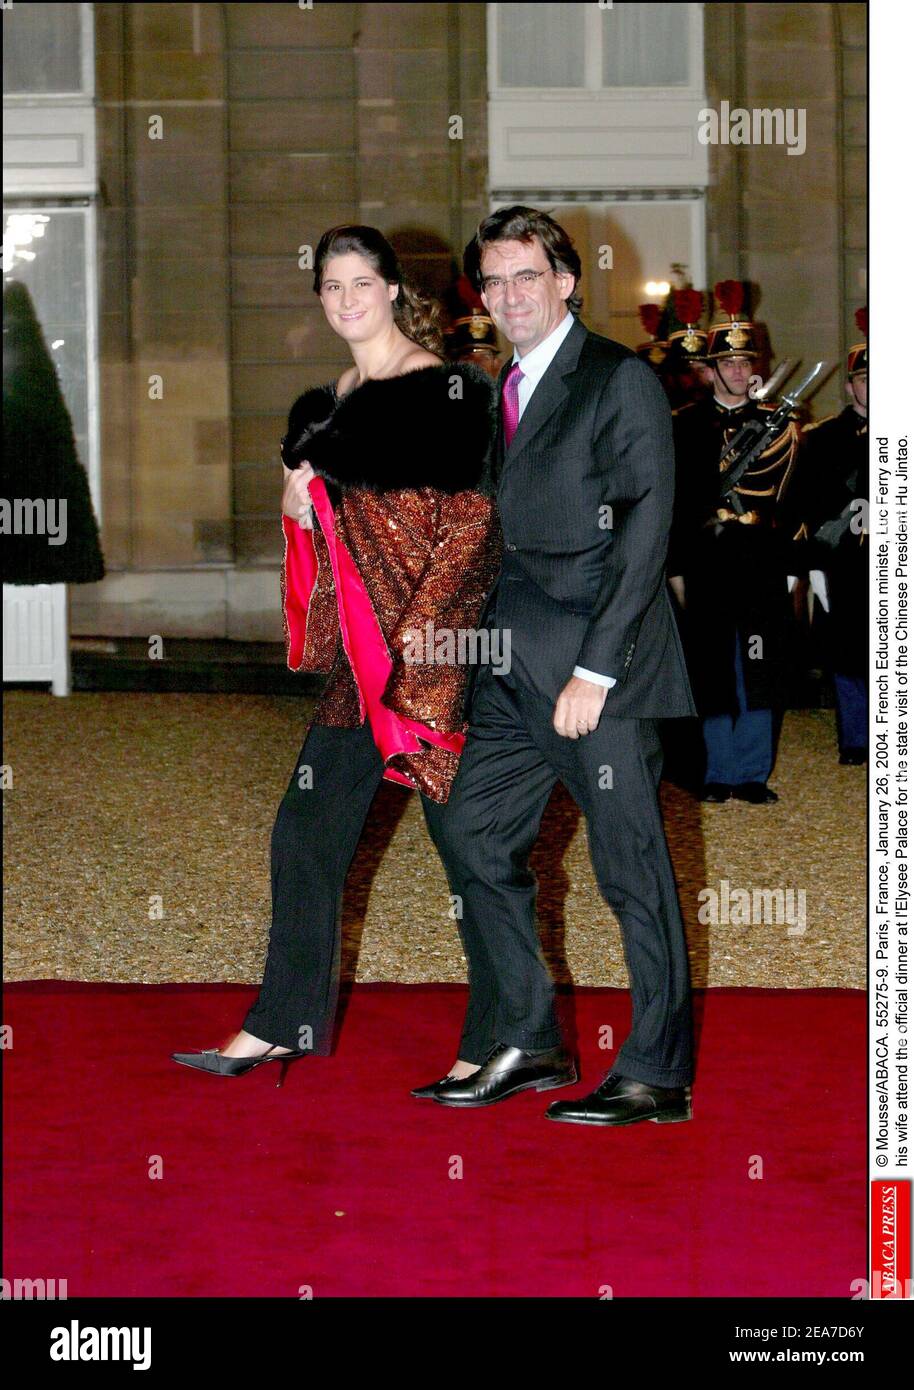 © Mousse/ABACA. 55275-9. Paris, France, January 26, 2004. French Education ministe, Luc Ferry and his wife attend the official dinner at l'Elysee Palace for the state visit of the Chinese President Hu Jintao. Stock Photo